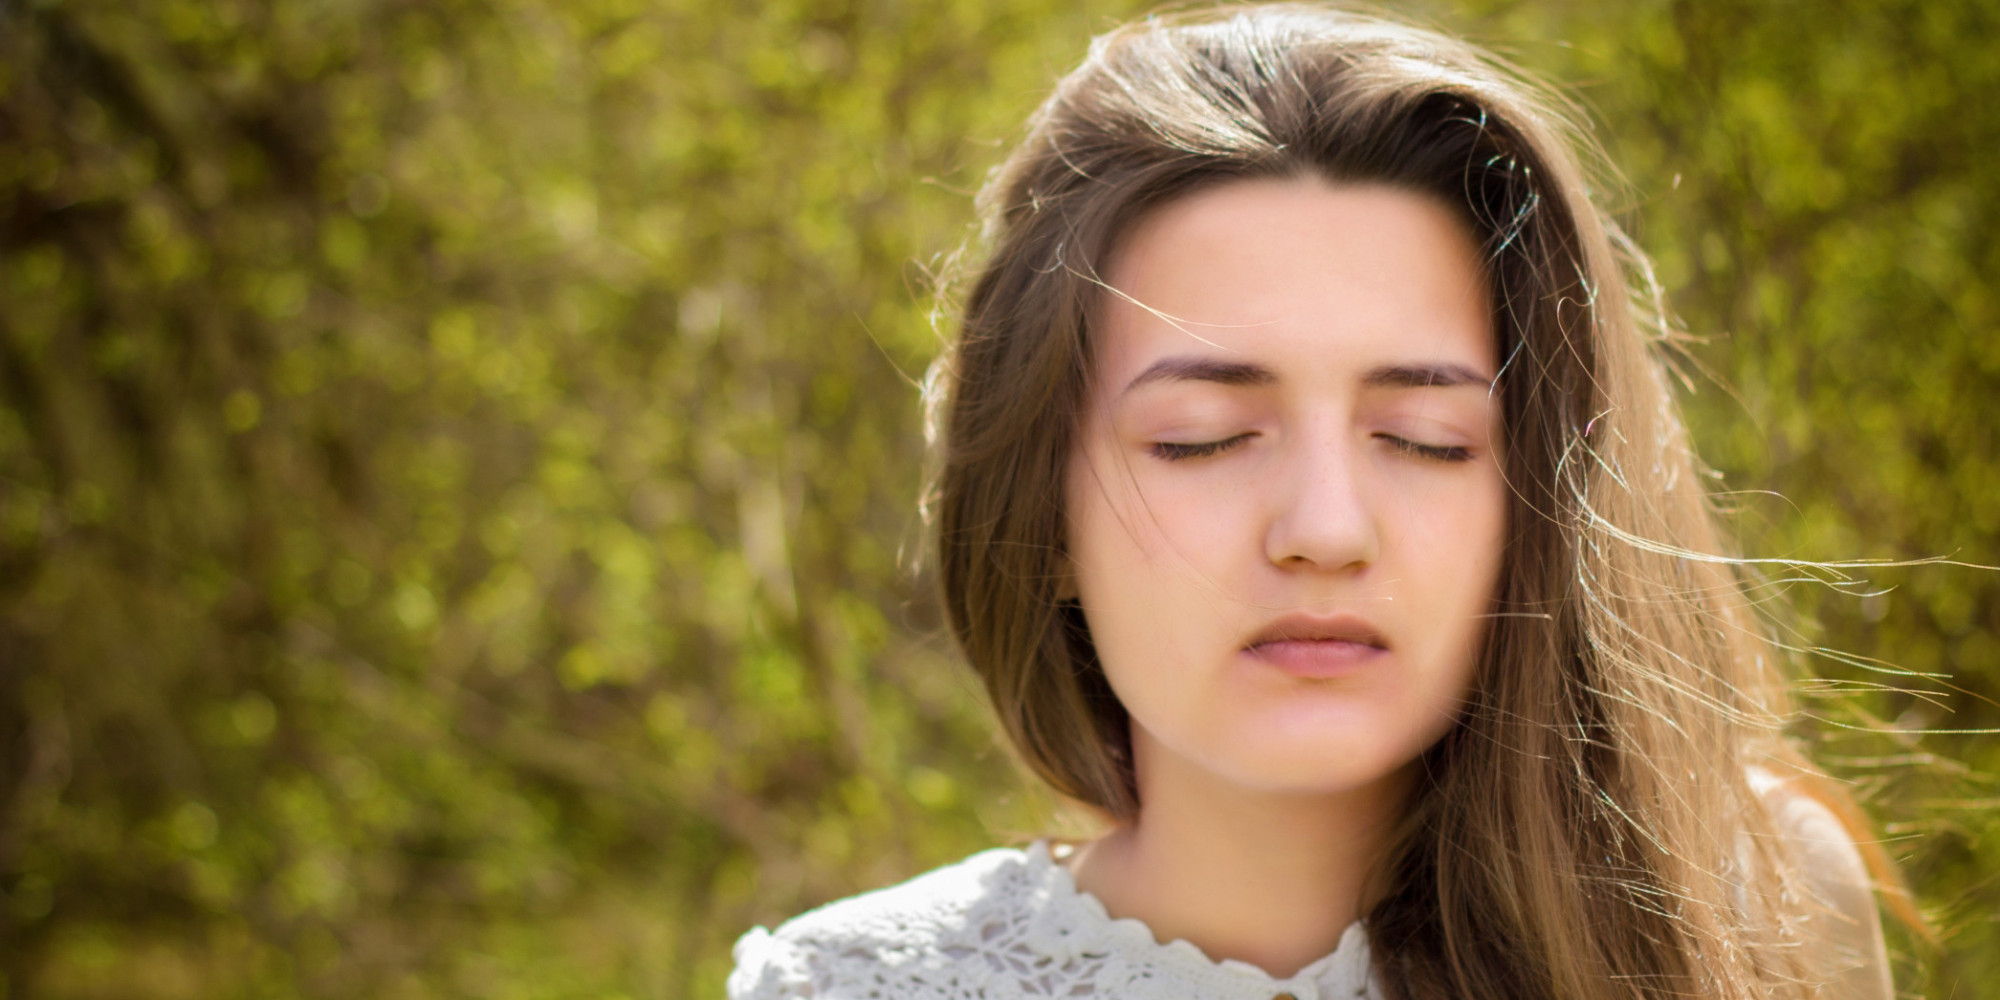 Teaching Mindfulness to Teenagers: 5 Ways to Get Started